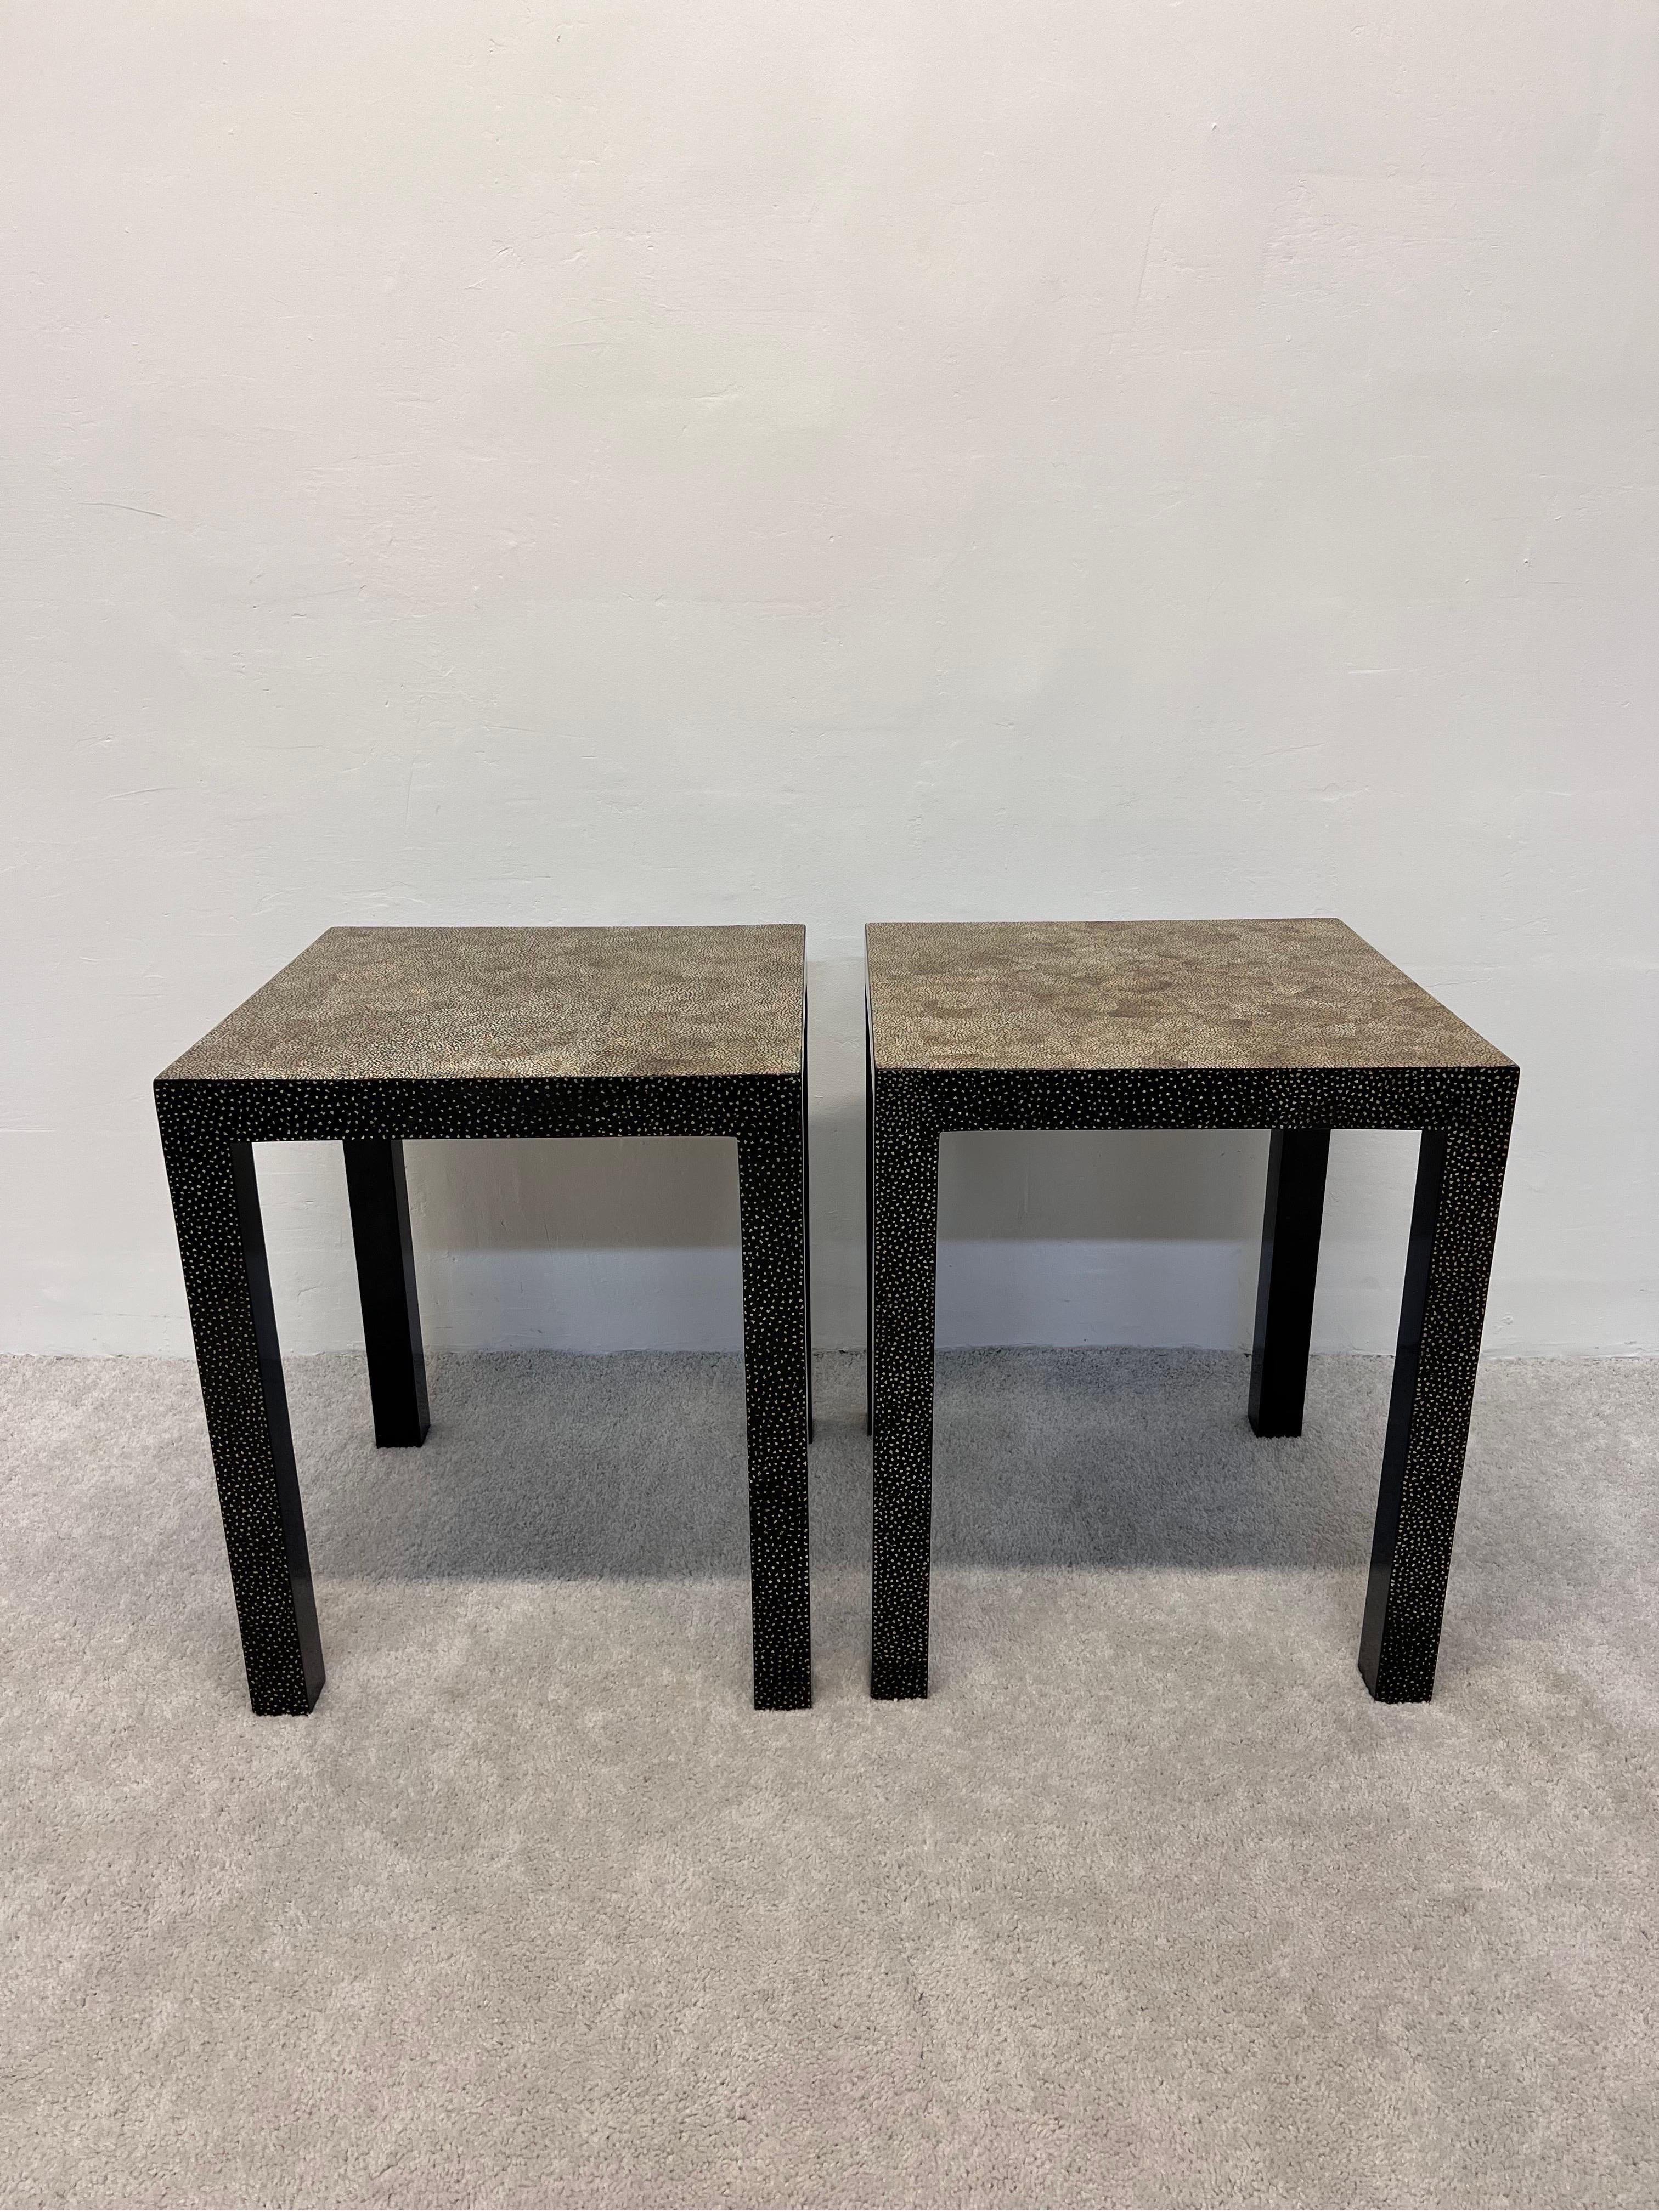 Pair of parsons style cracked eggshell and lacquered side tables by Palecek, 1990s.